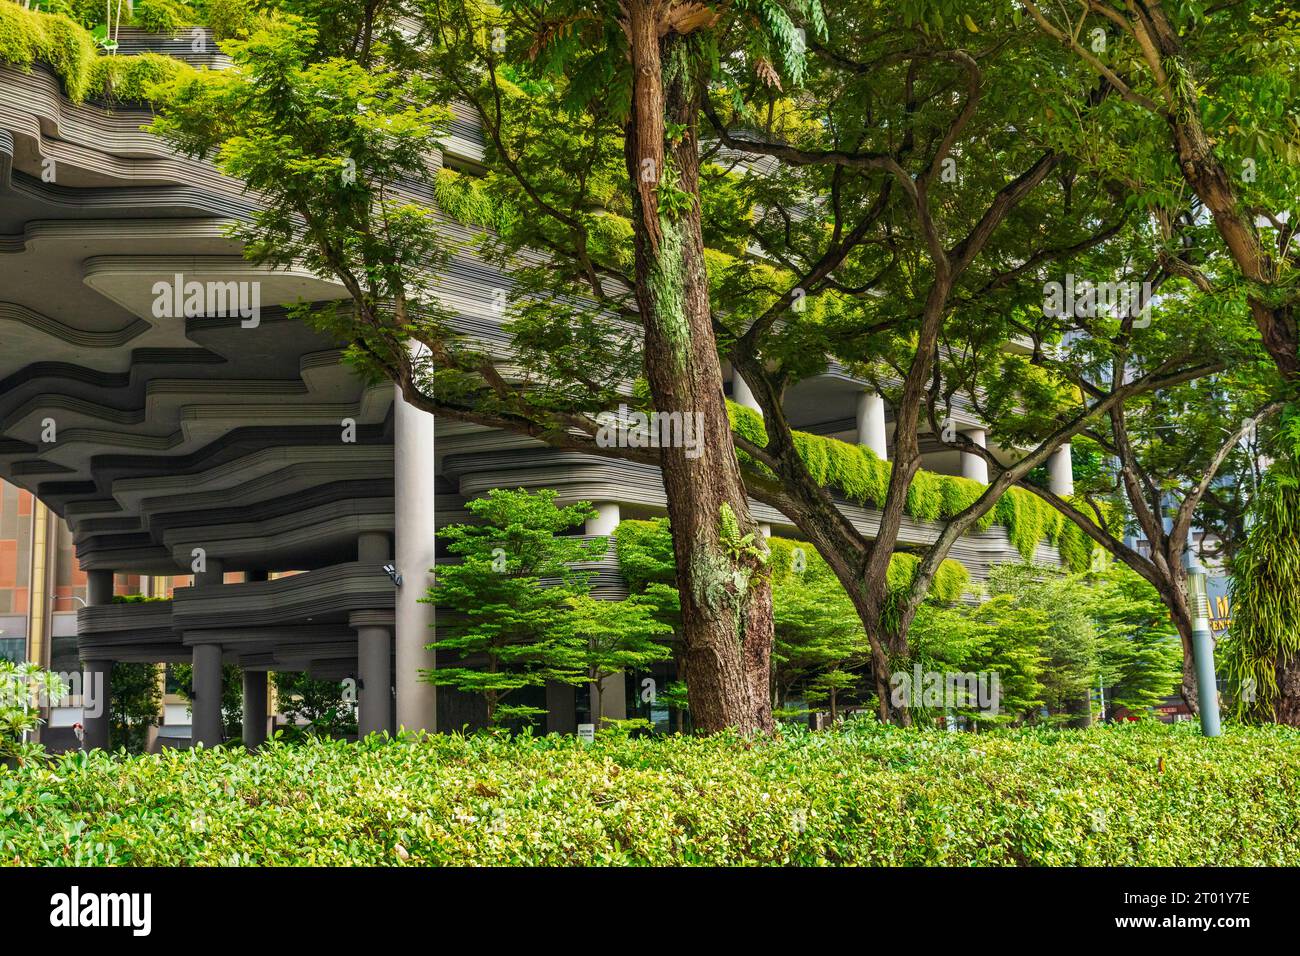 Hotel Park Royal on Pickering, Singapore.  Landscape design includes tiered façade planted with tropical ferns and creeping vines. Stock Photo